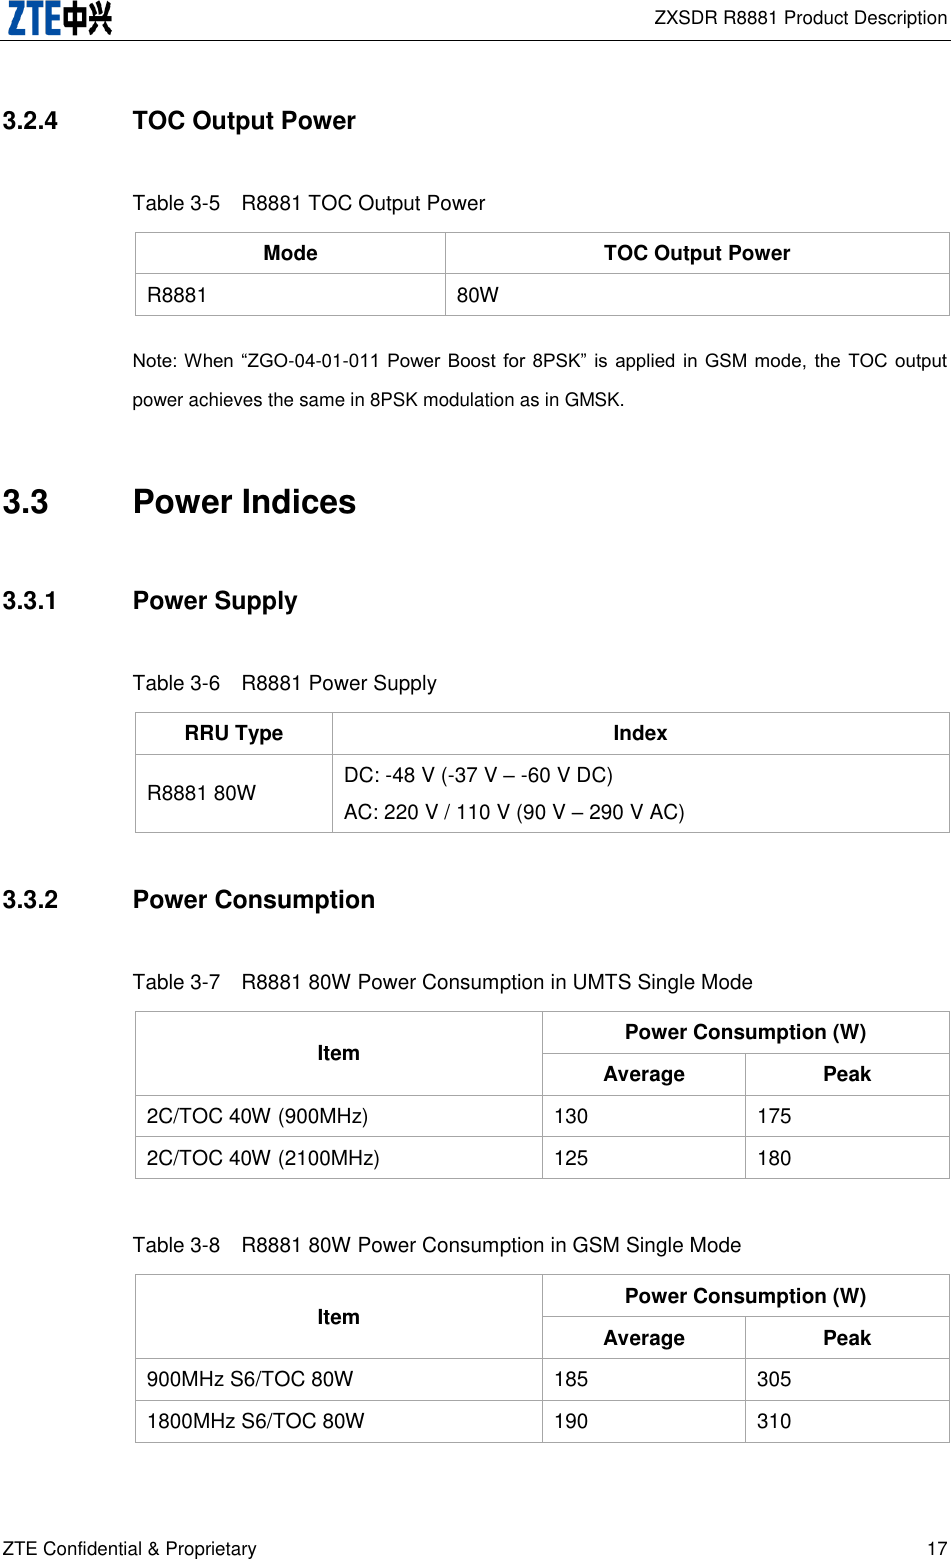  ZXSDR R8881 Product Description ZTE Confidential &amp; Proprietary 17 3.2.4  TOC Output Power Table 3-5  R8881 TOC Output Power Mode TOC Output Power R8881 80W Note: When “ZGO-04-01-011 Power  Boost  for  8PSK”  is  applied  in  GSM mode,  the  TOC output power achieves the same in 8PSK modulation as in GMSK. 3.3  Power Indices 3.3.1  Power Supply Table 3-6  R8881 Power Supply RRU Type Index R8881 80W DC: -48 V (-37 V – -60 V DC) AC: 220 V / 110 V (90 V – 290 V AC) 3.3.2  Power Consumption Table 3-7  R8881 80W Power Consumption in UMTS Single Mode Item Power Consumption (W) Average Peak 2C/TOC 40W (900MHz) 130 175 2C/TOC 40W (2100MHz) 125 180 Table 3-8  R8881 80W Power Consumption in GSM Single Mode Item Power Consumption (W) Average Peak 900MHz S6/TOC 80W 185 305 1800MHz S6/TOC 80W 190 310 